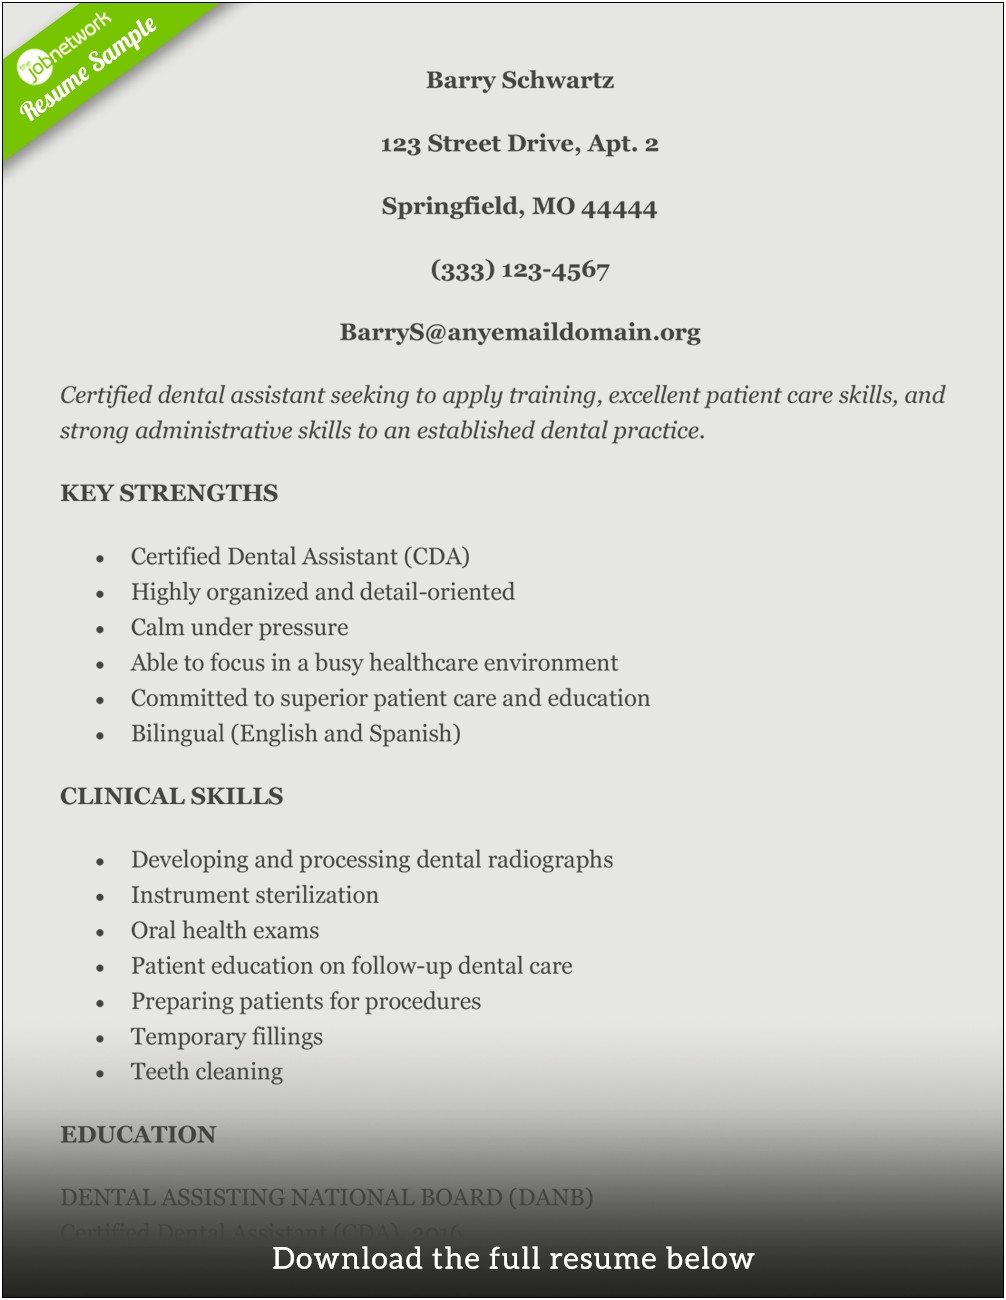 Good Things To Say On Dental Resume